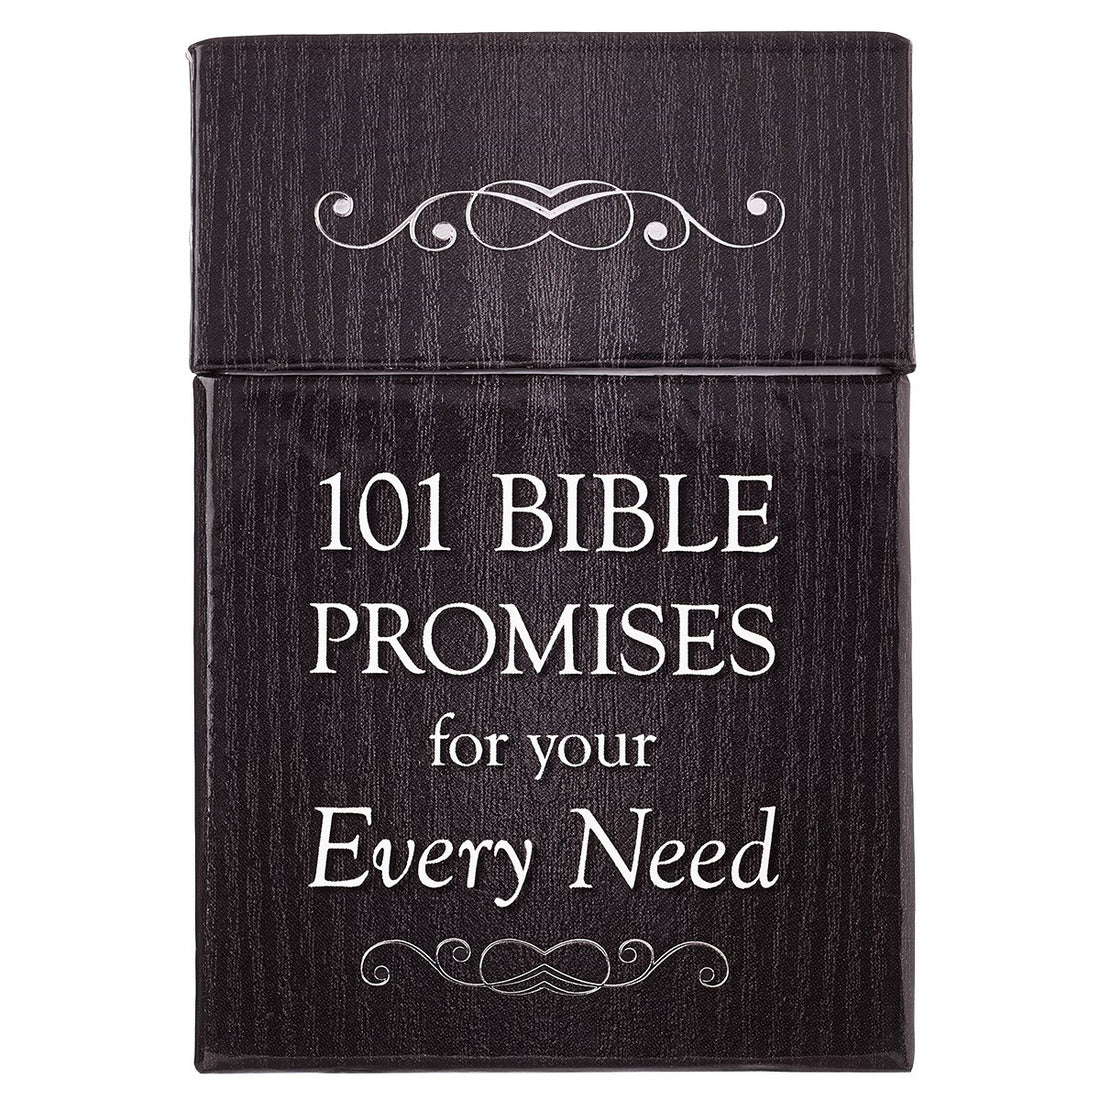 Seed of Abraham Christian Bookstore - (In)Courage - Box Of Blessings-101 Bible Promises For Your Every Need